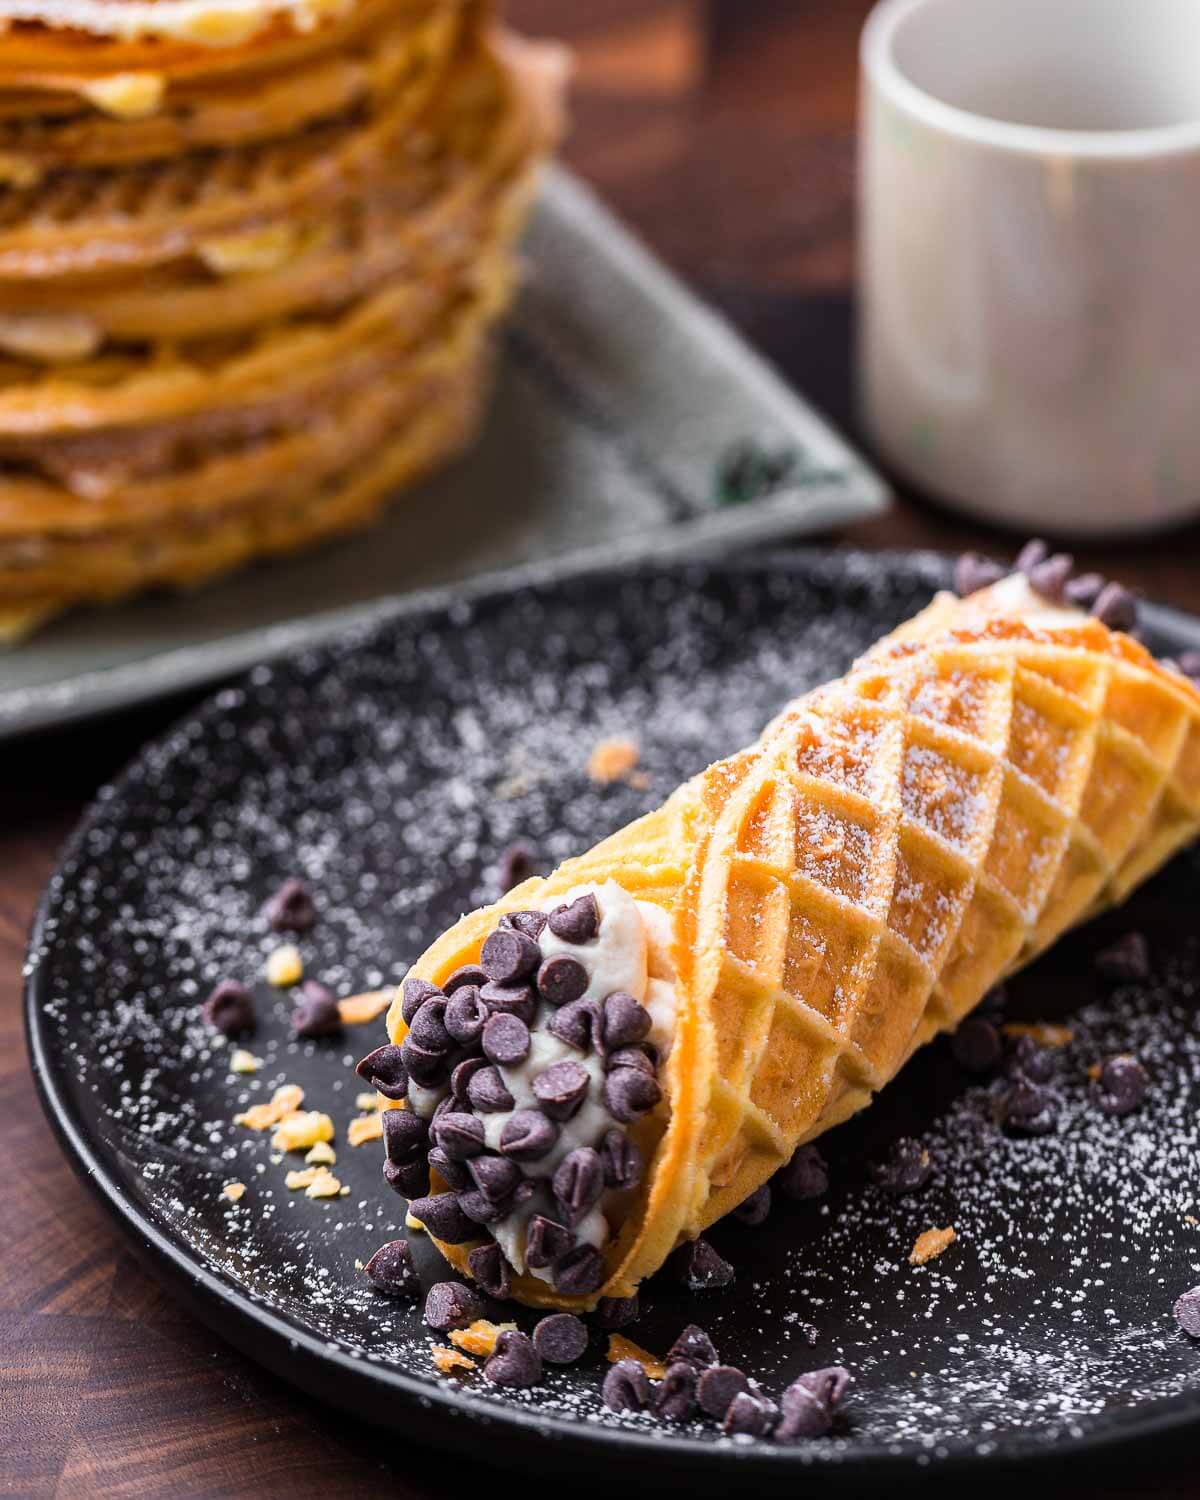 Pizzelle cannoli on black plate with coffee and stack of pizzelles in the background.